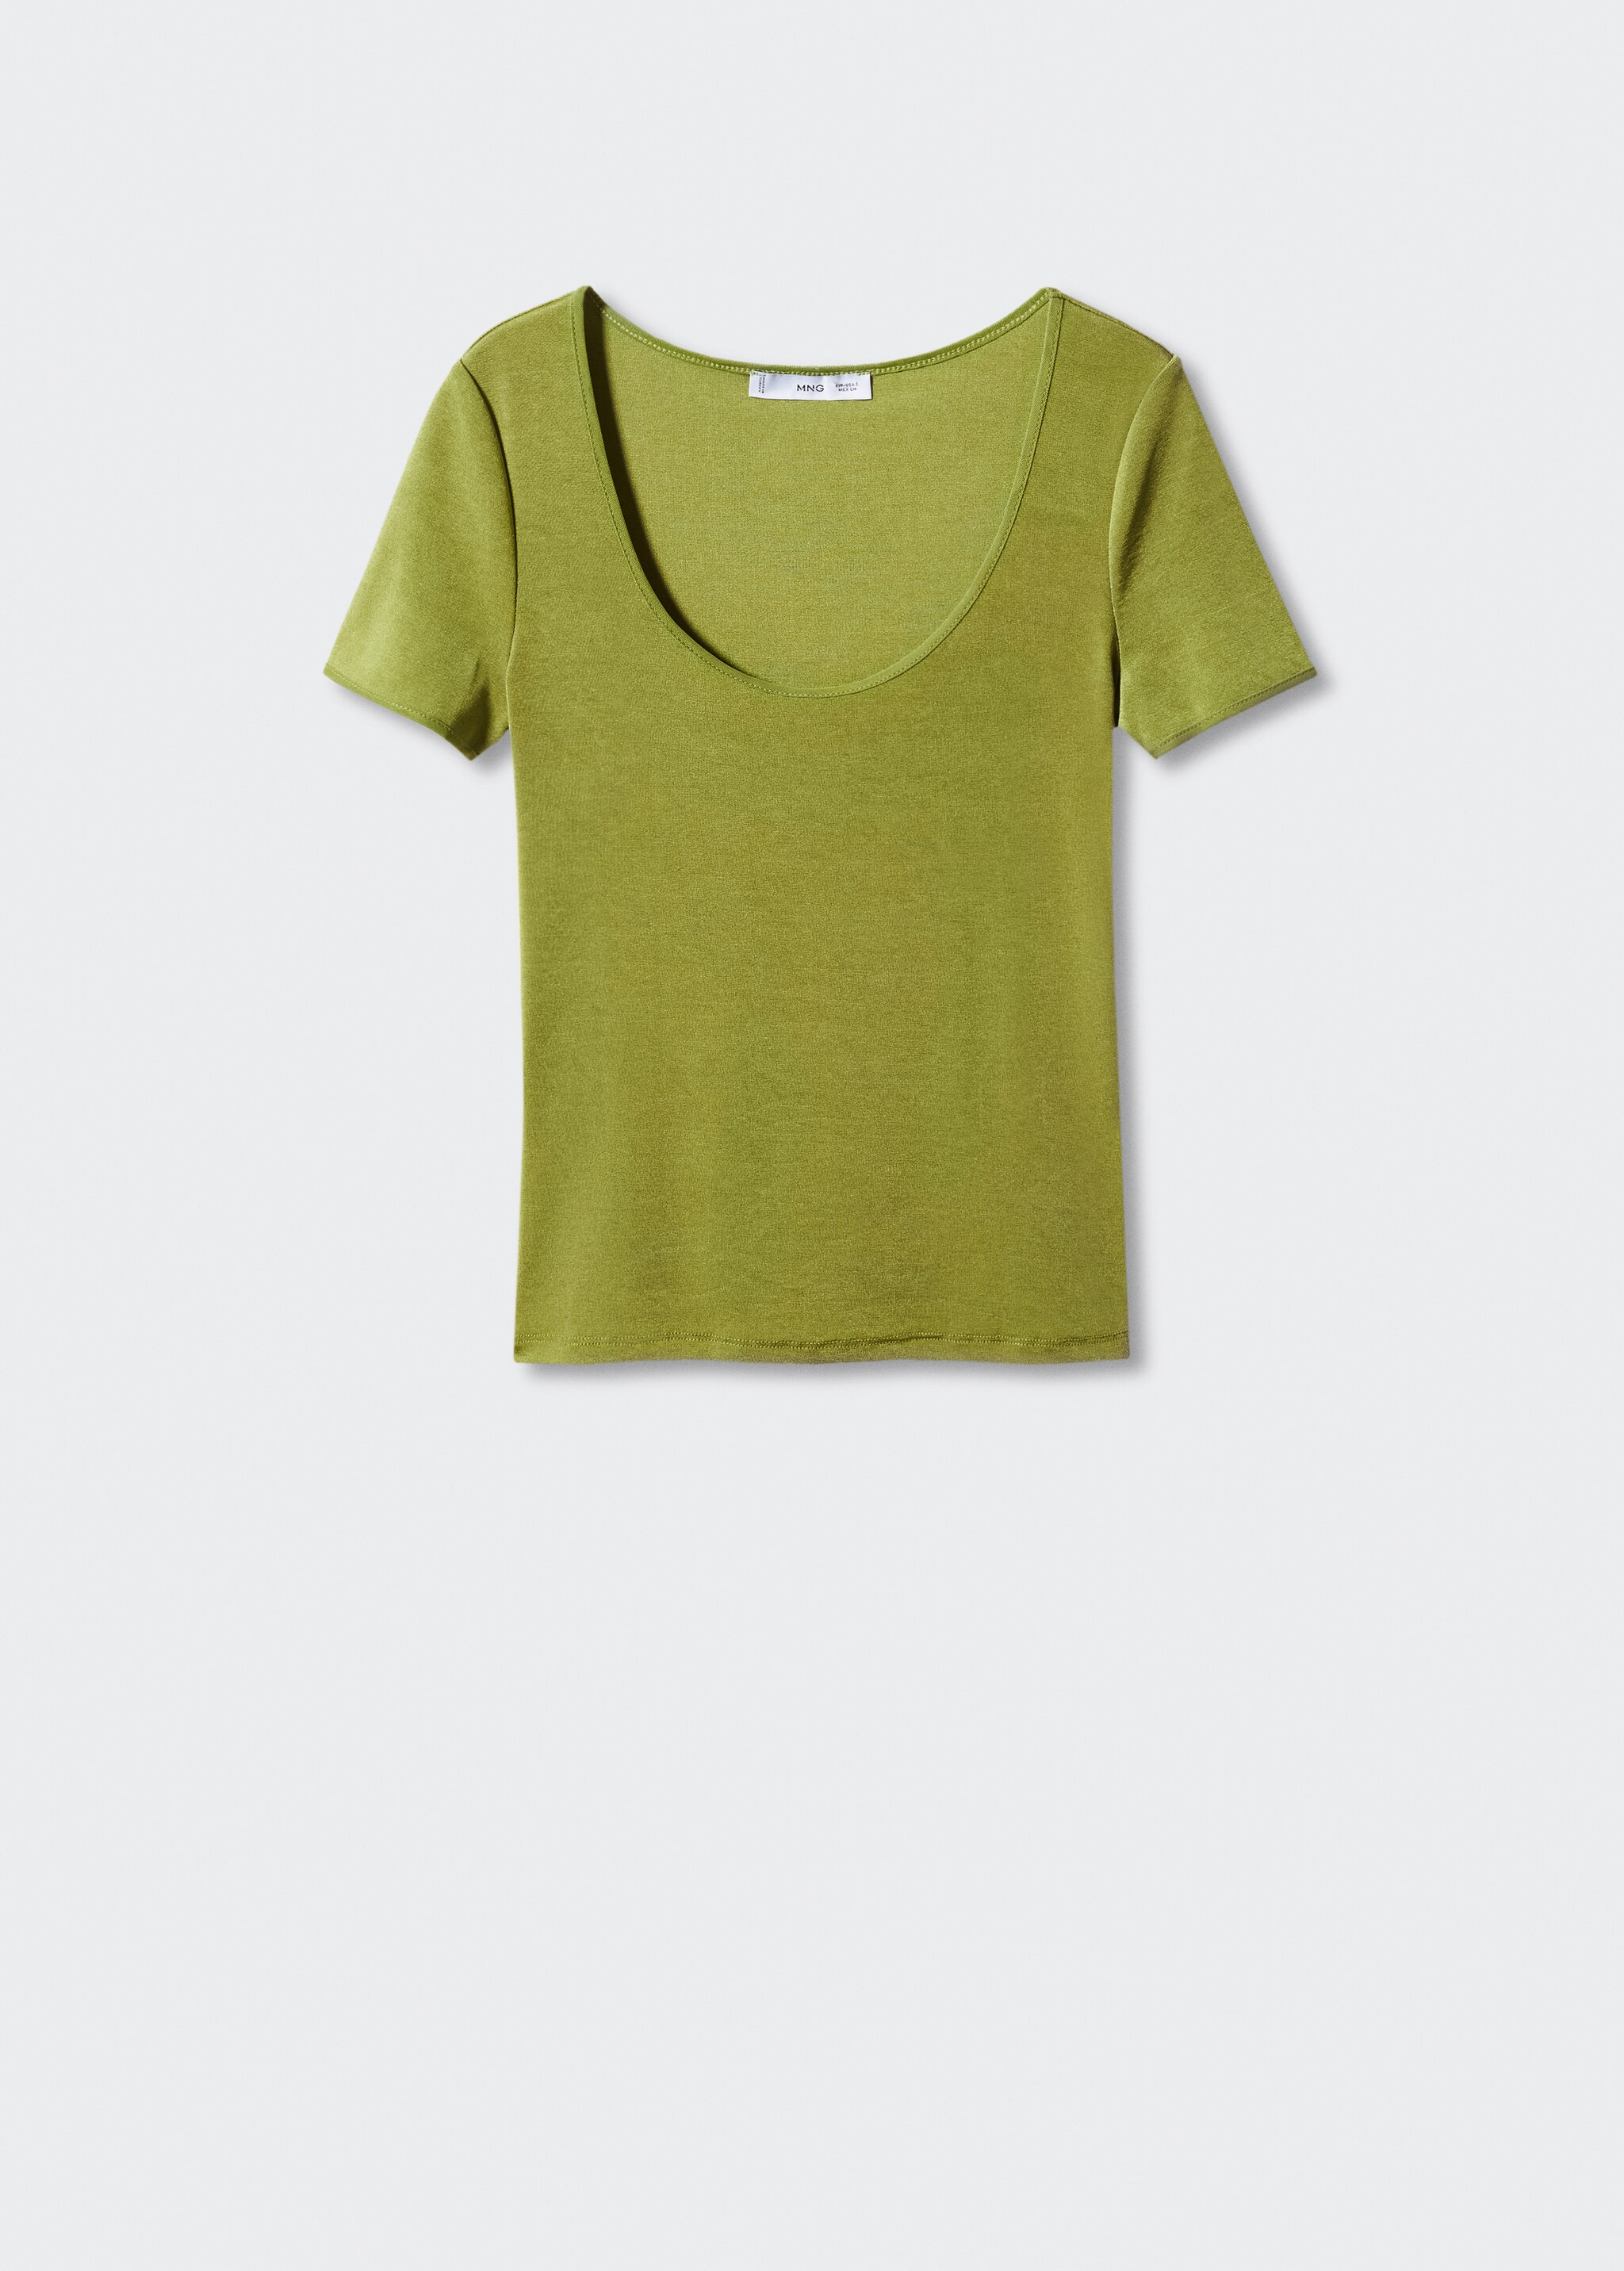 Low neck t-shirt - Article without model